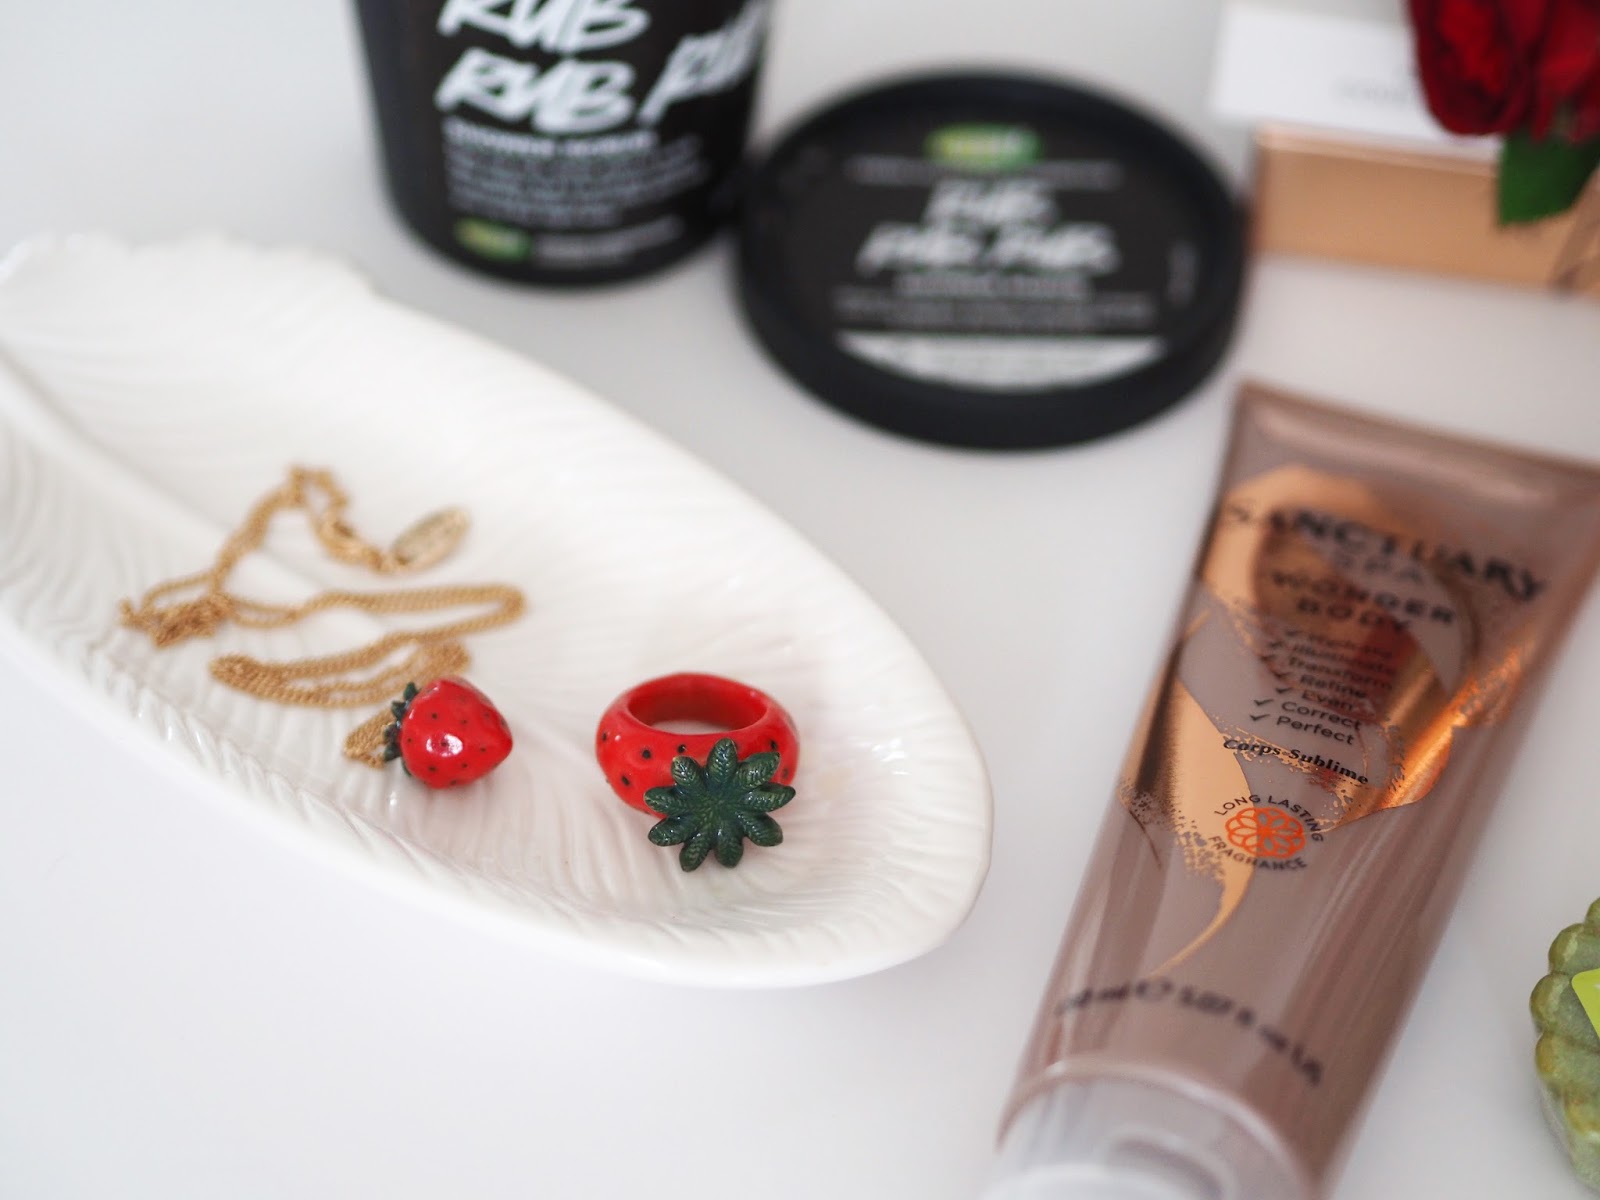 Loves List July, Katie Kirk Loves, UK Blogger, Beauty Blogger, Fashion Blogger, Beauty Favourites, Lush Cosmetics, Charlotte Tilbury, Sanctuary Spa, Spacemasks Eye Masks, Yankee Candle, And Mary Jewellery, Summer Favourites